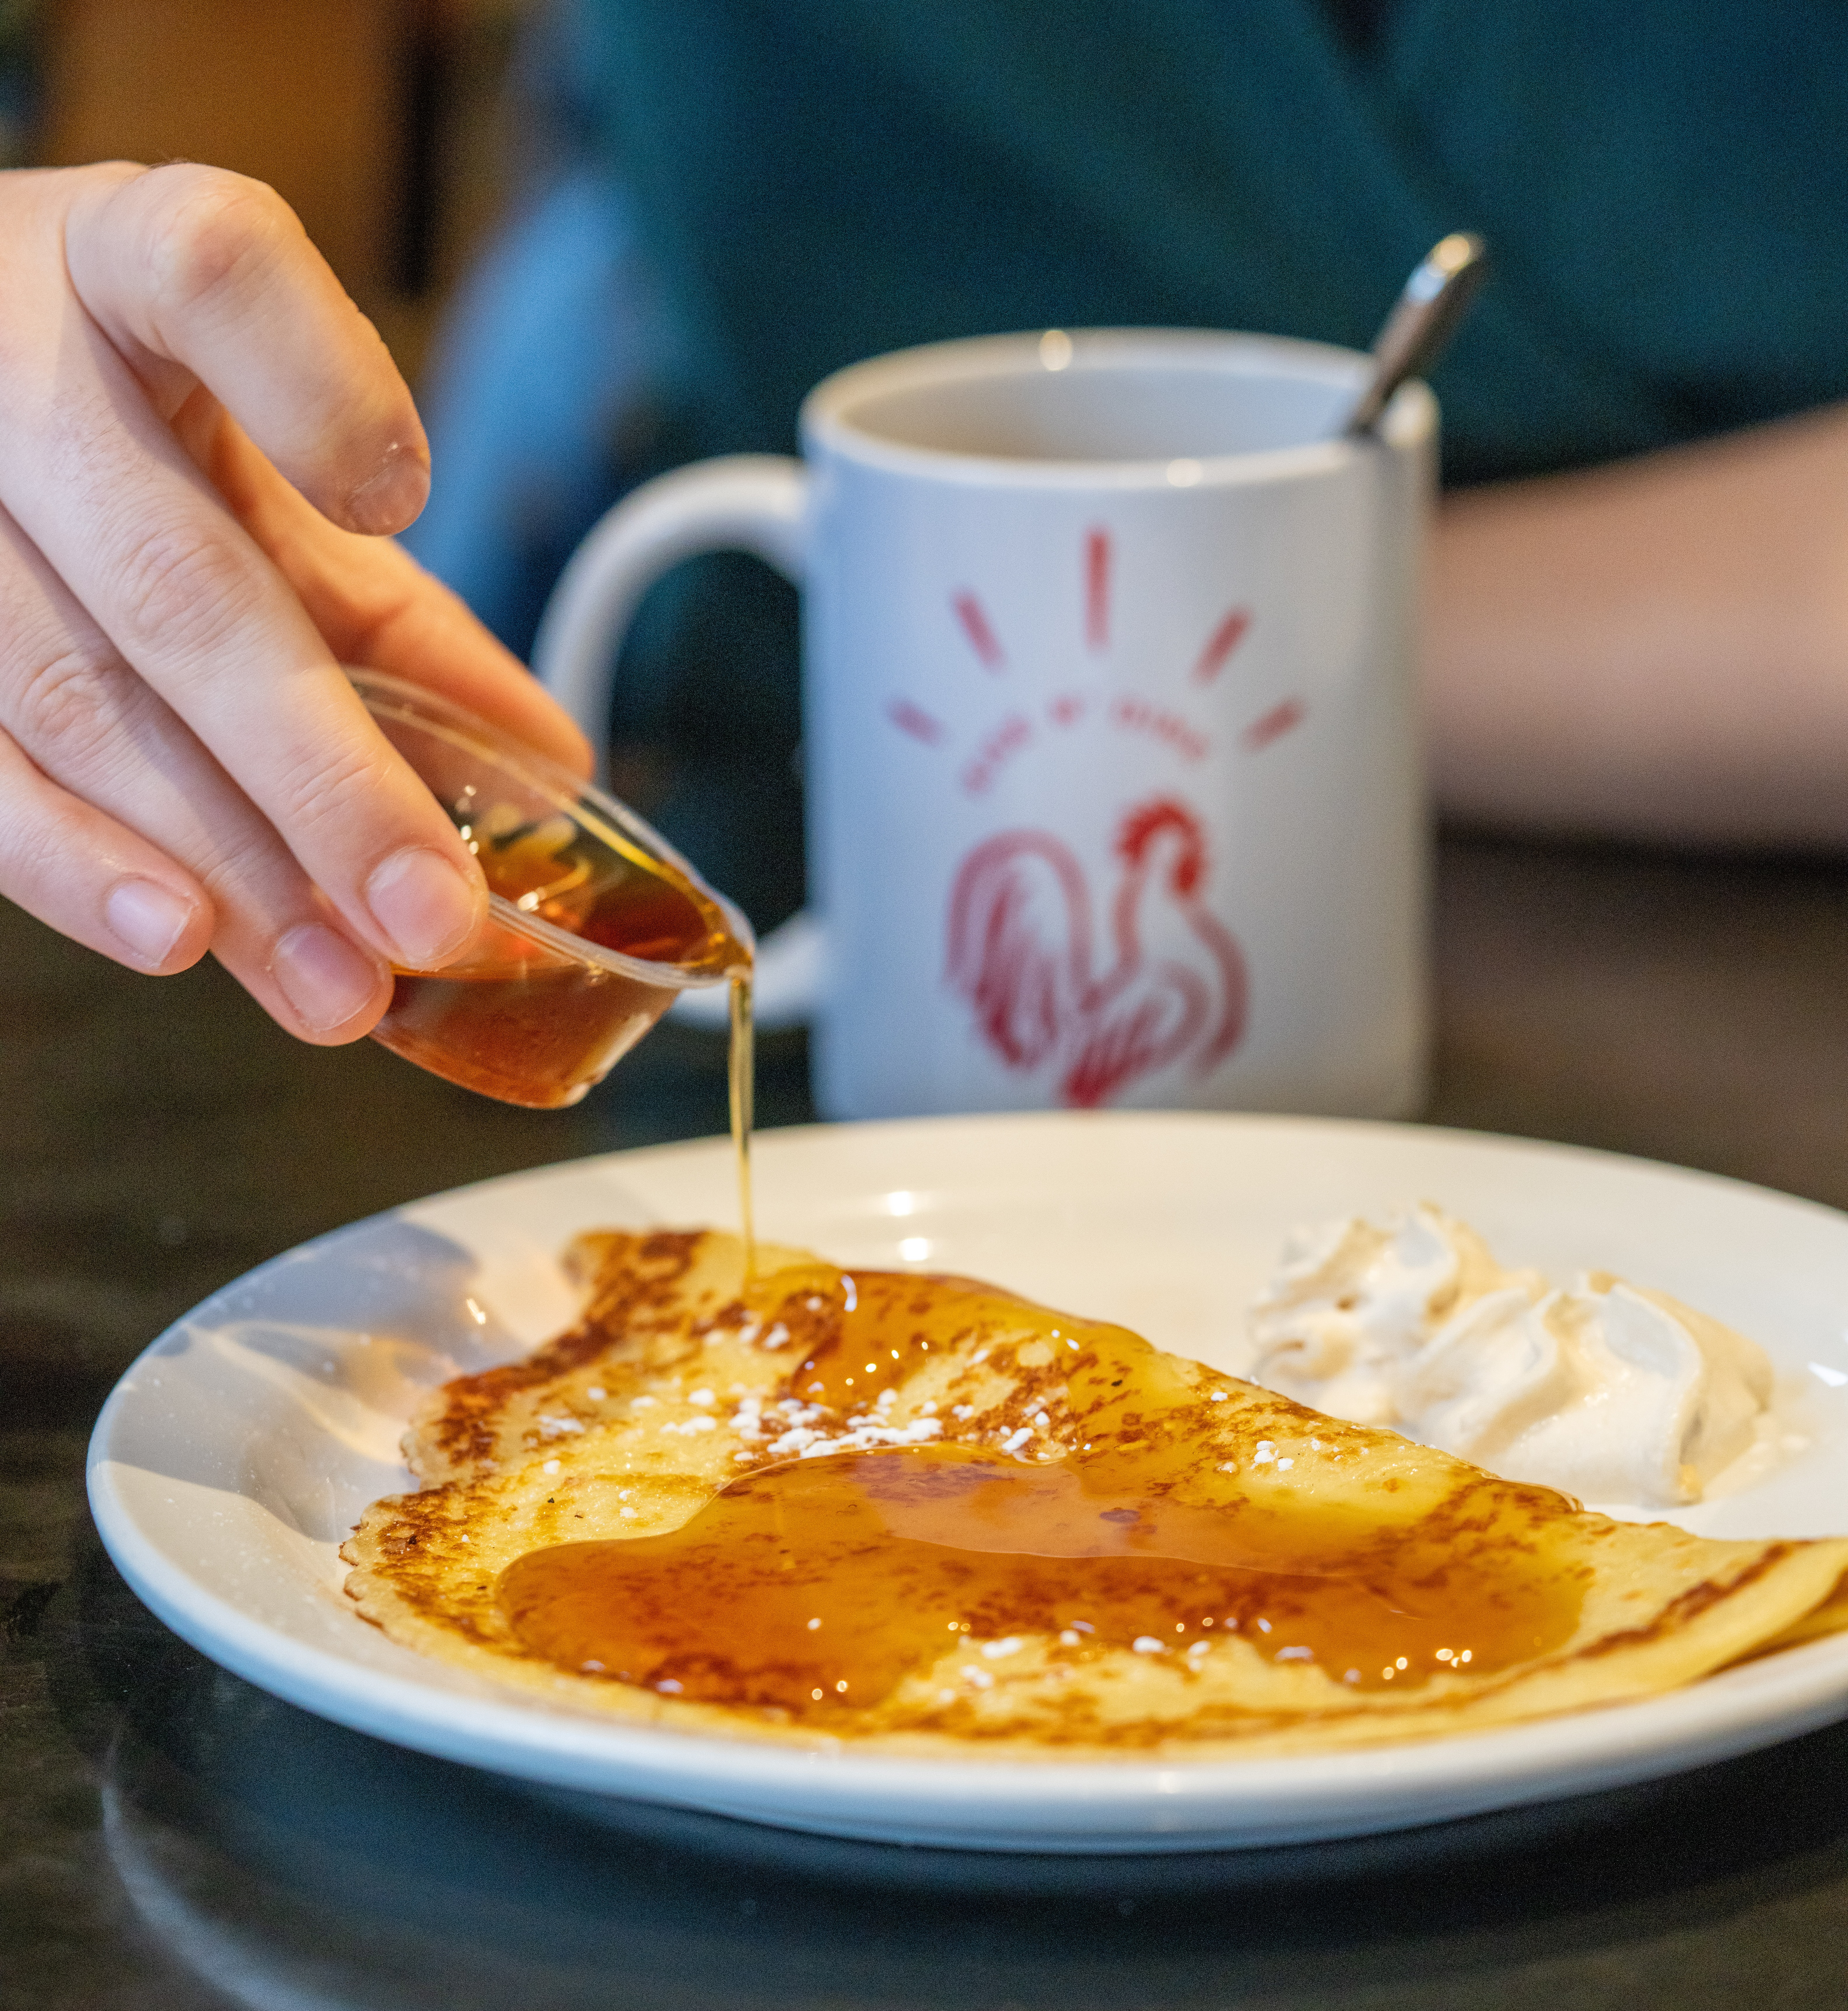 a finnish pancake on a plate, being drizzled with maple syrup. In the background there is a coffee mug with a red rooster logo on it.